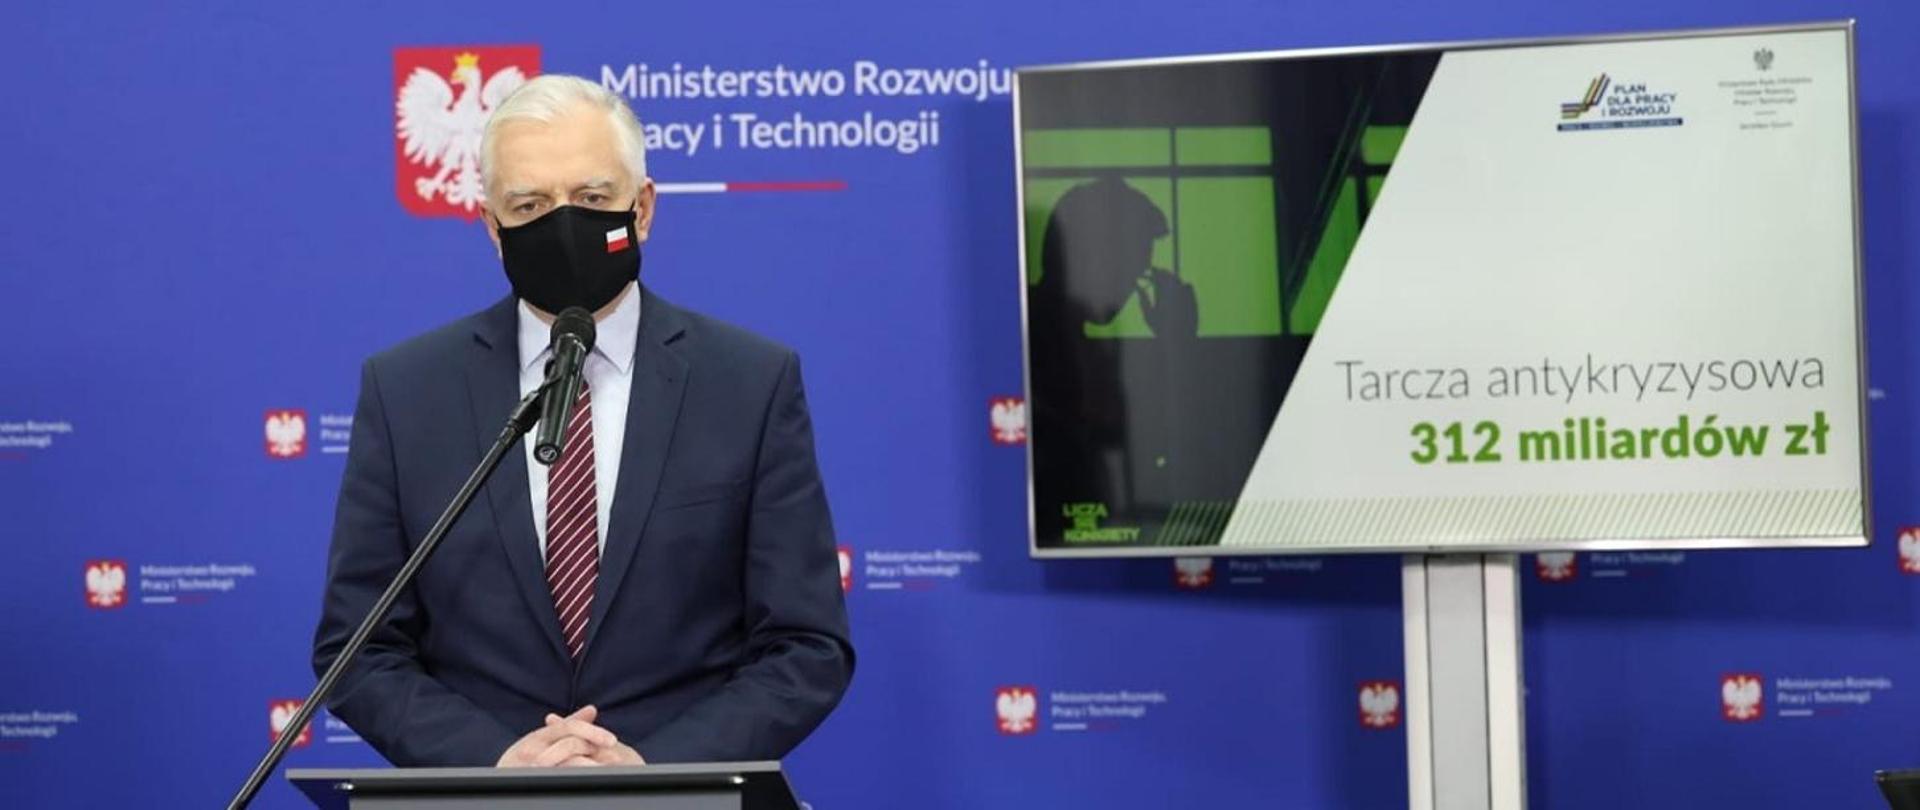 Deputy Prime Minister Jarosław Gowin and financial shield graphic